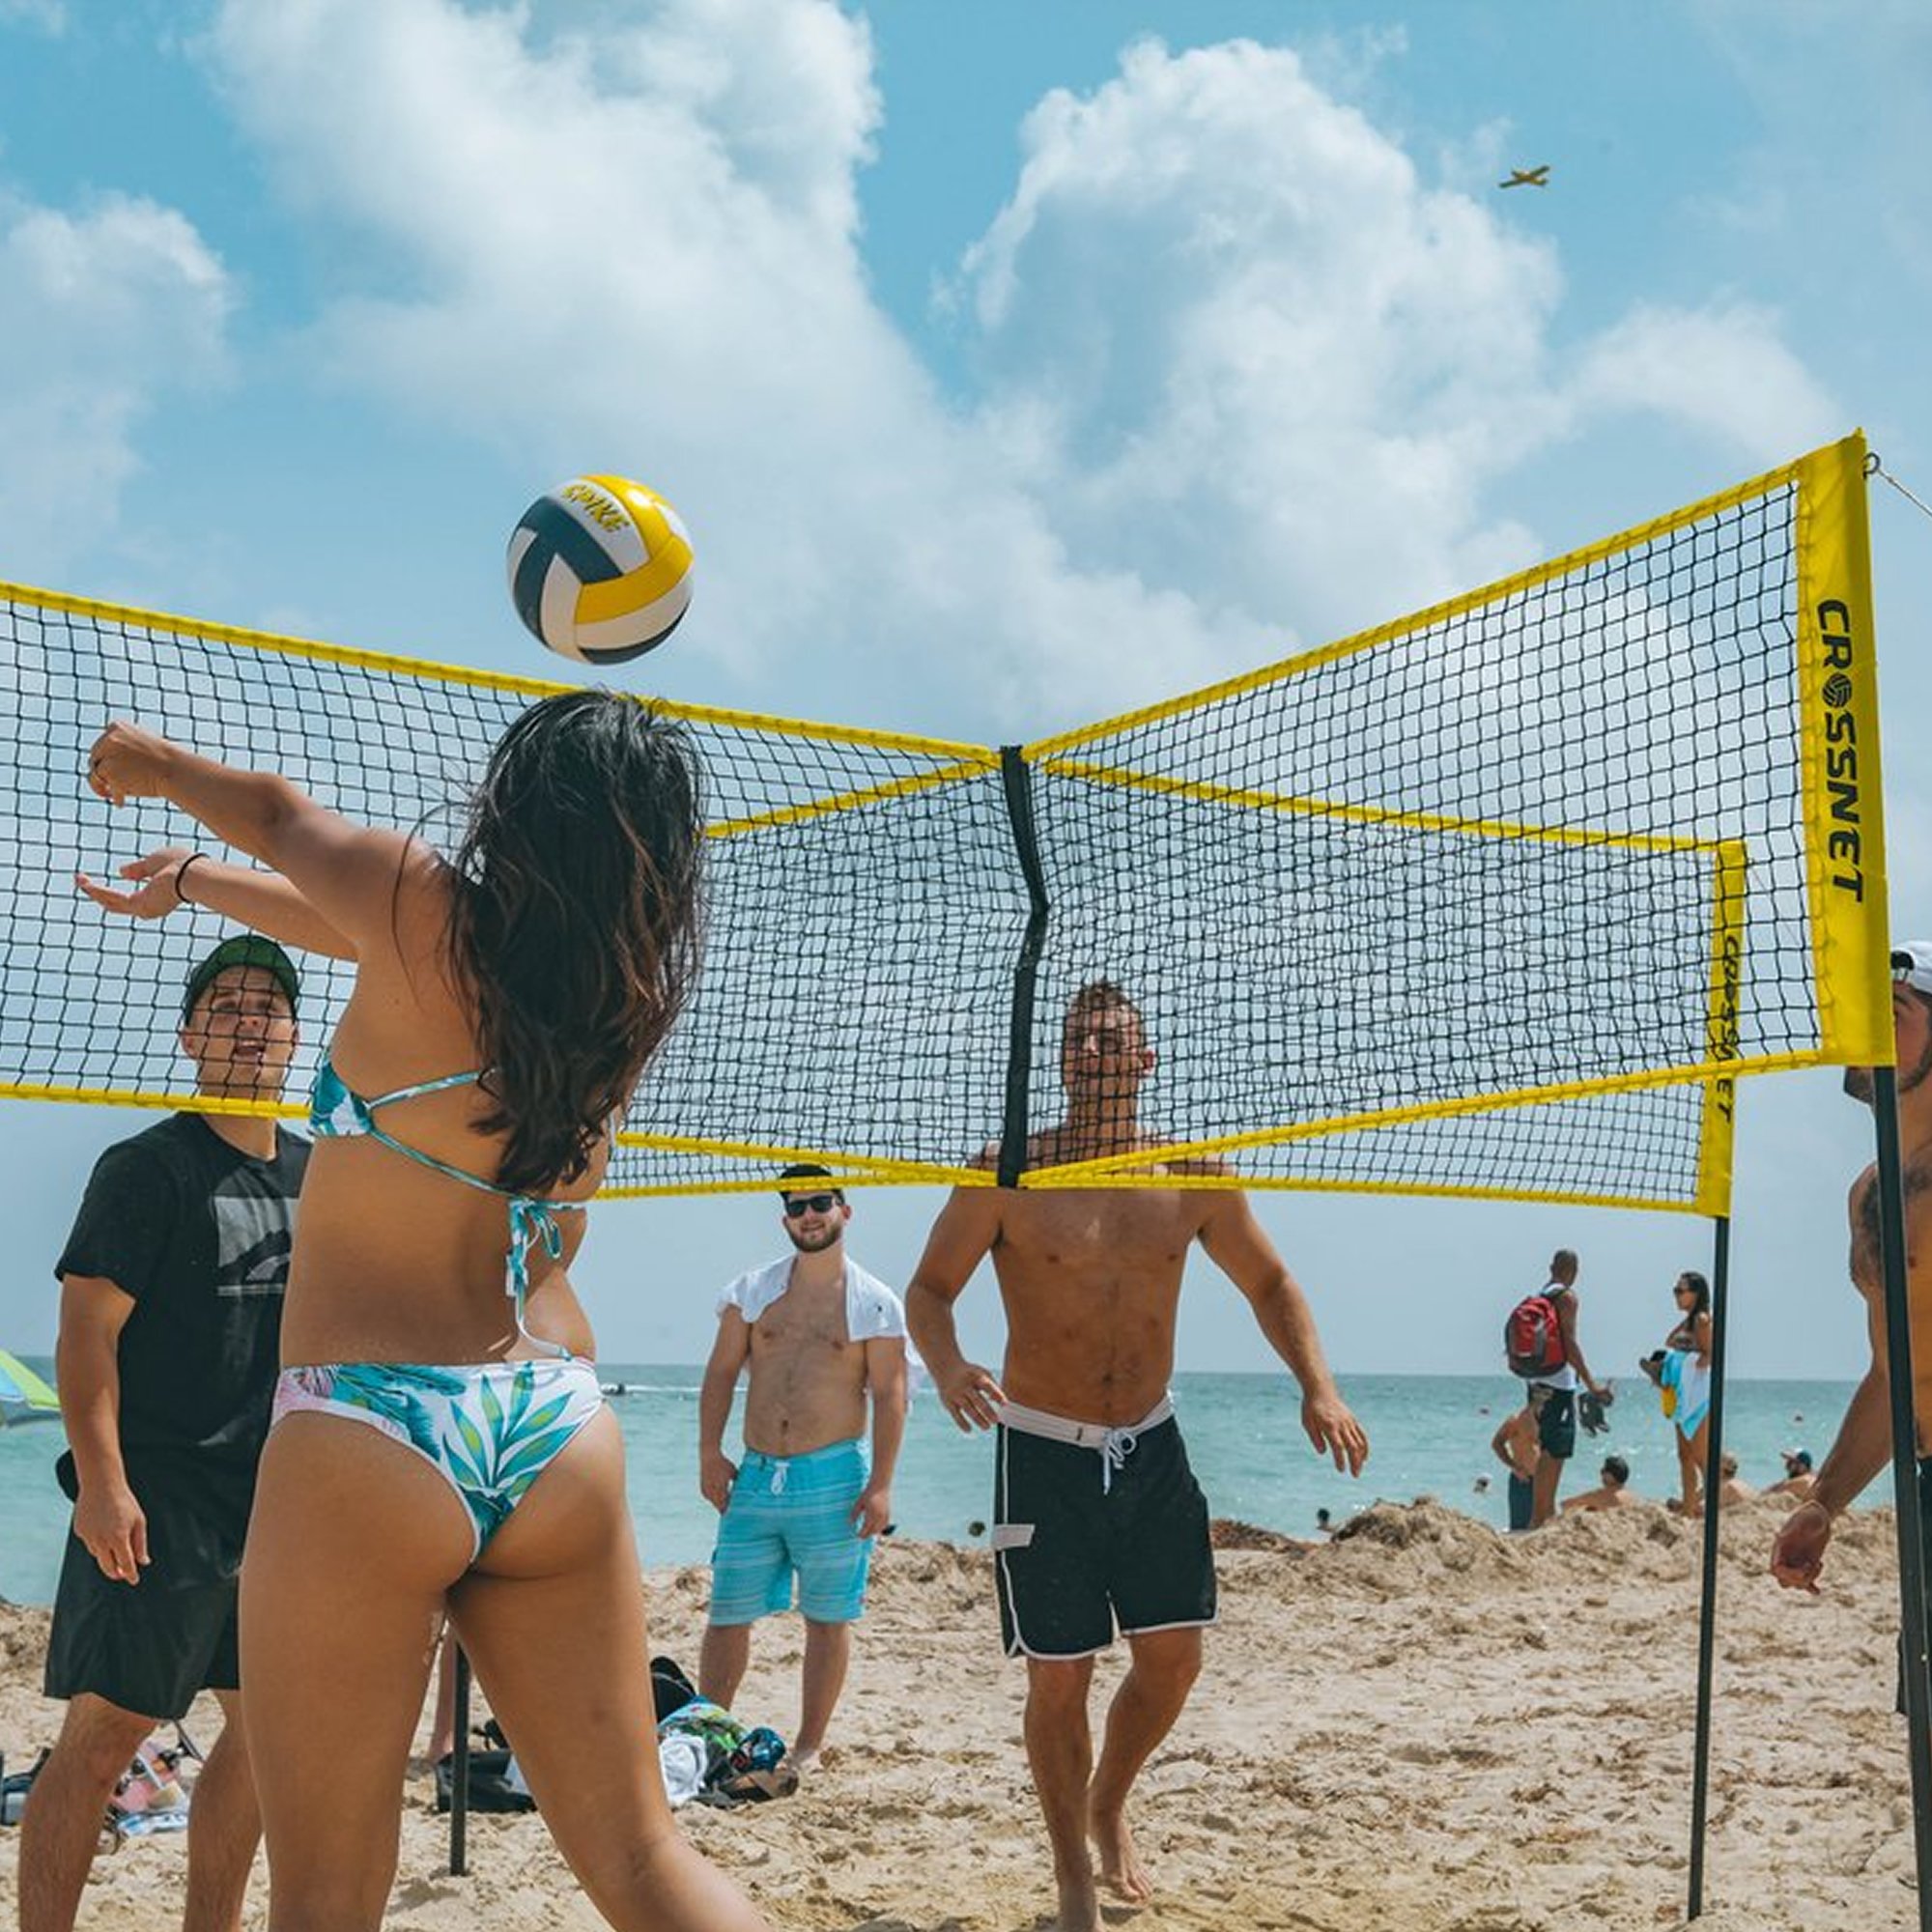 Crossnet Four Square Volleyball Netz